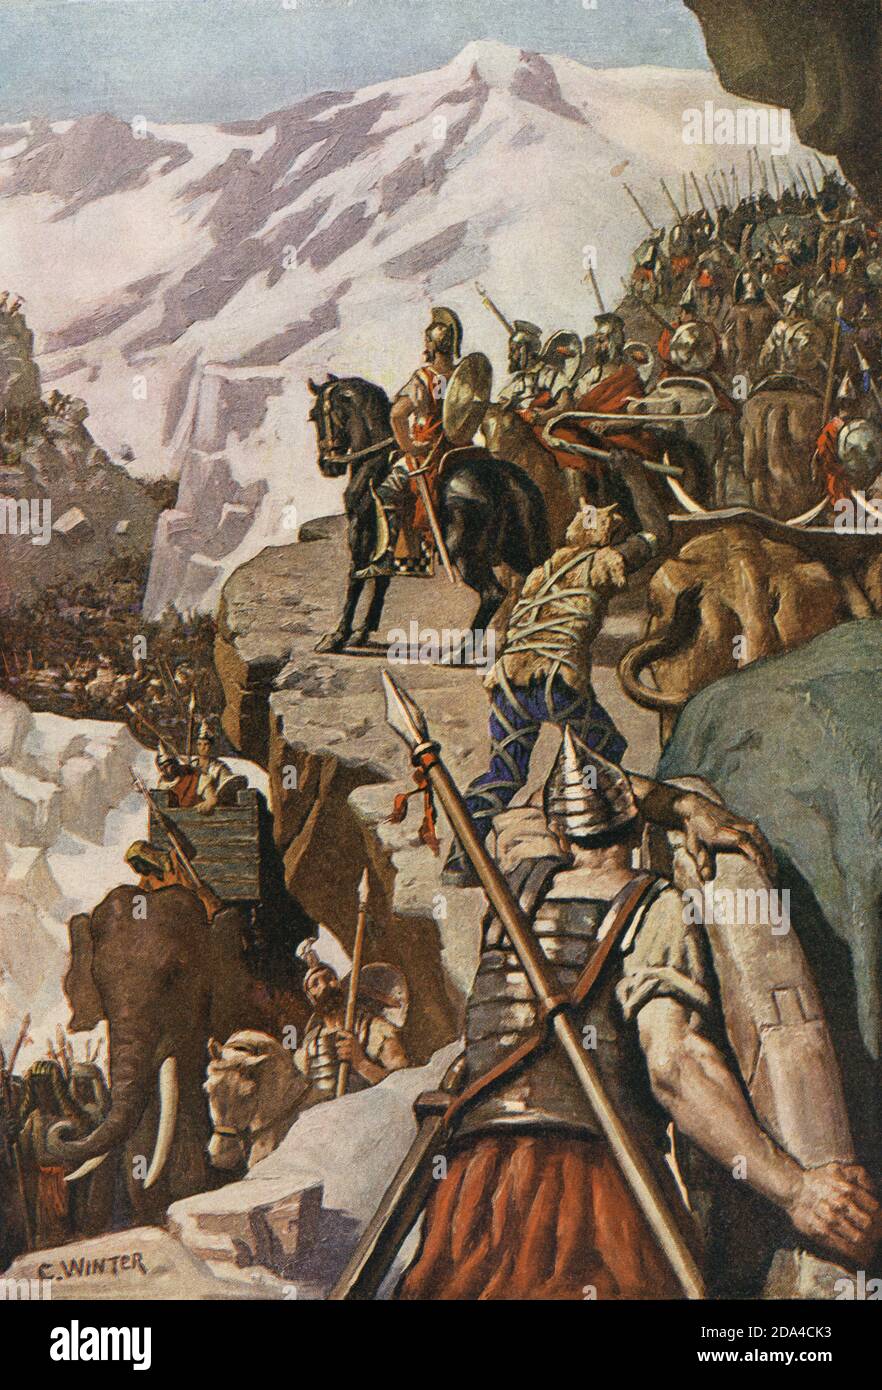 Hannibal crossing the Alps in 218 BC on his way to invade Italy during the Second Punic War.  After a work by Charles Winter. Stock Photo